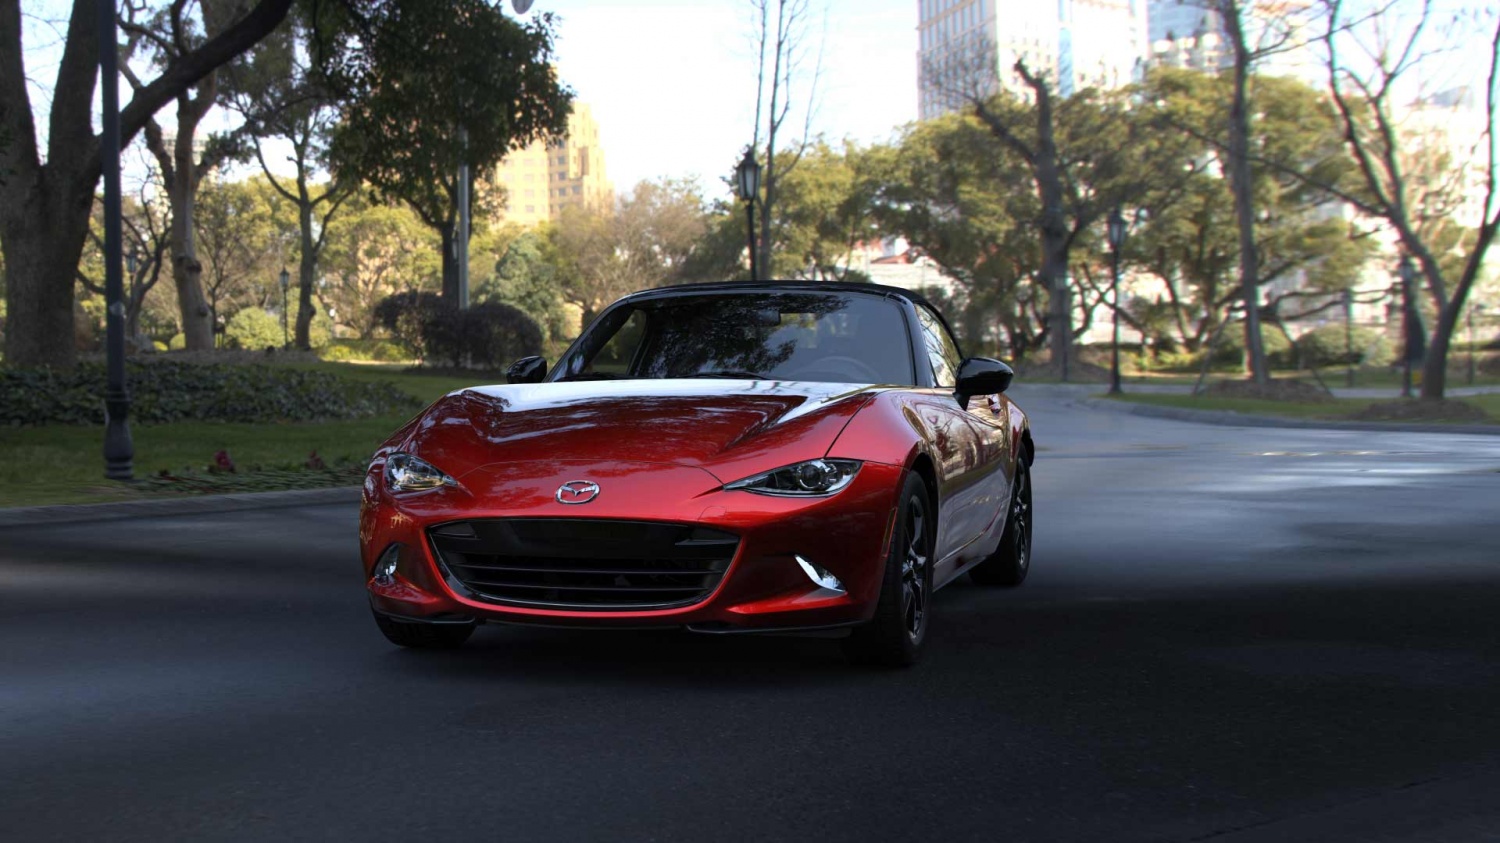 Mazda MX-5 Miata to Be an Electric Vehicle? This Famous Roadster Is Getting en Electric Motor